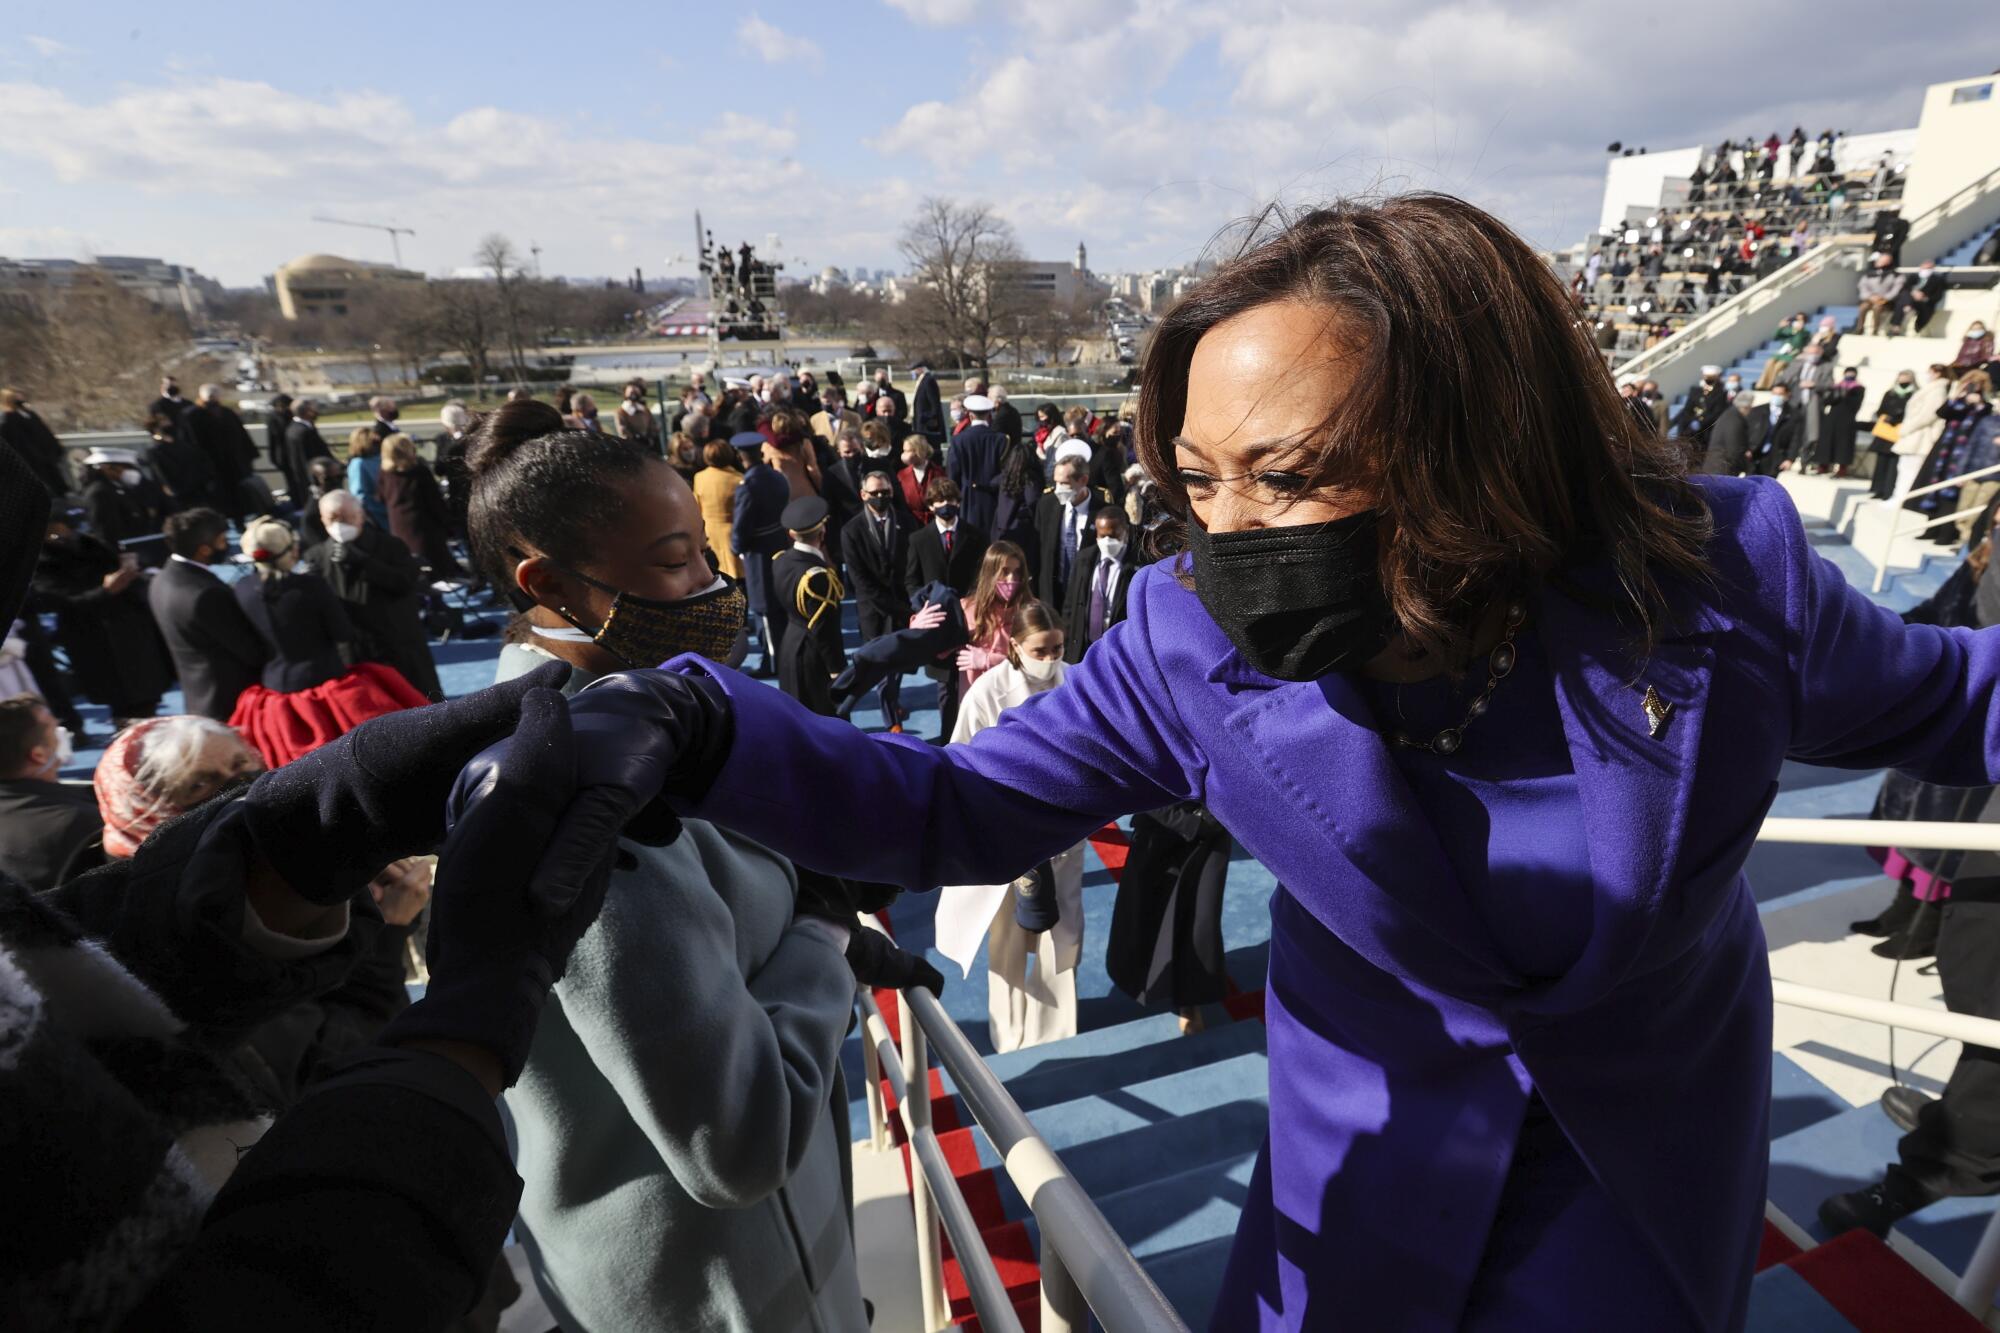 Vice President Kamala Harris shakes hands while rising from her seat after she was inaugurated. People are in the background